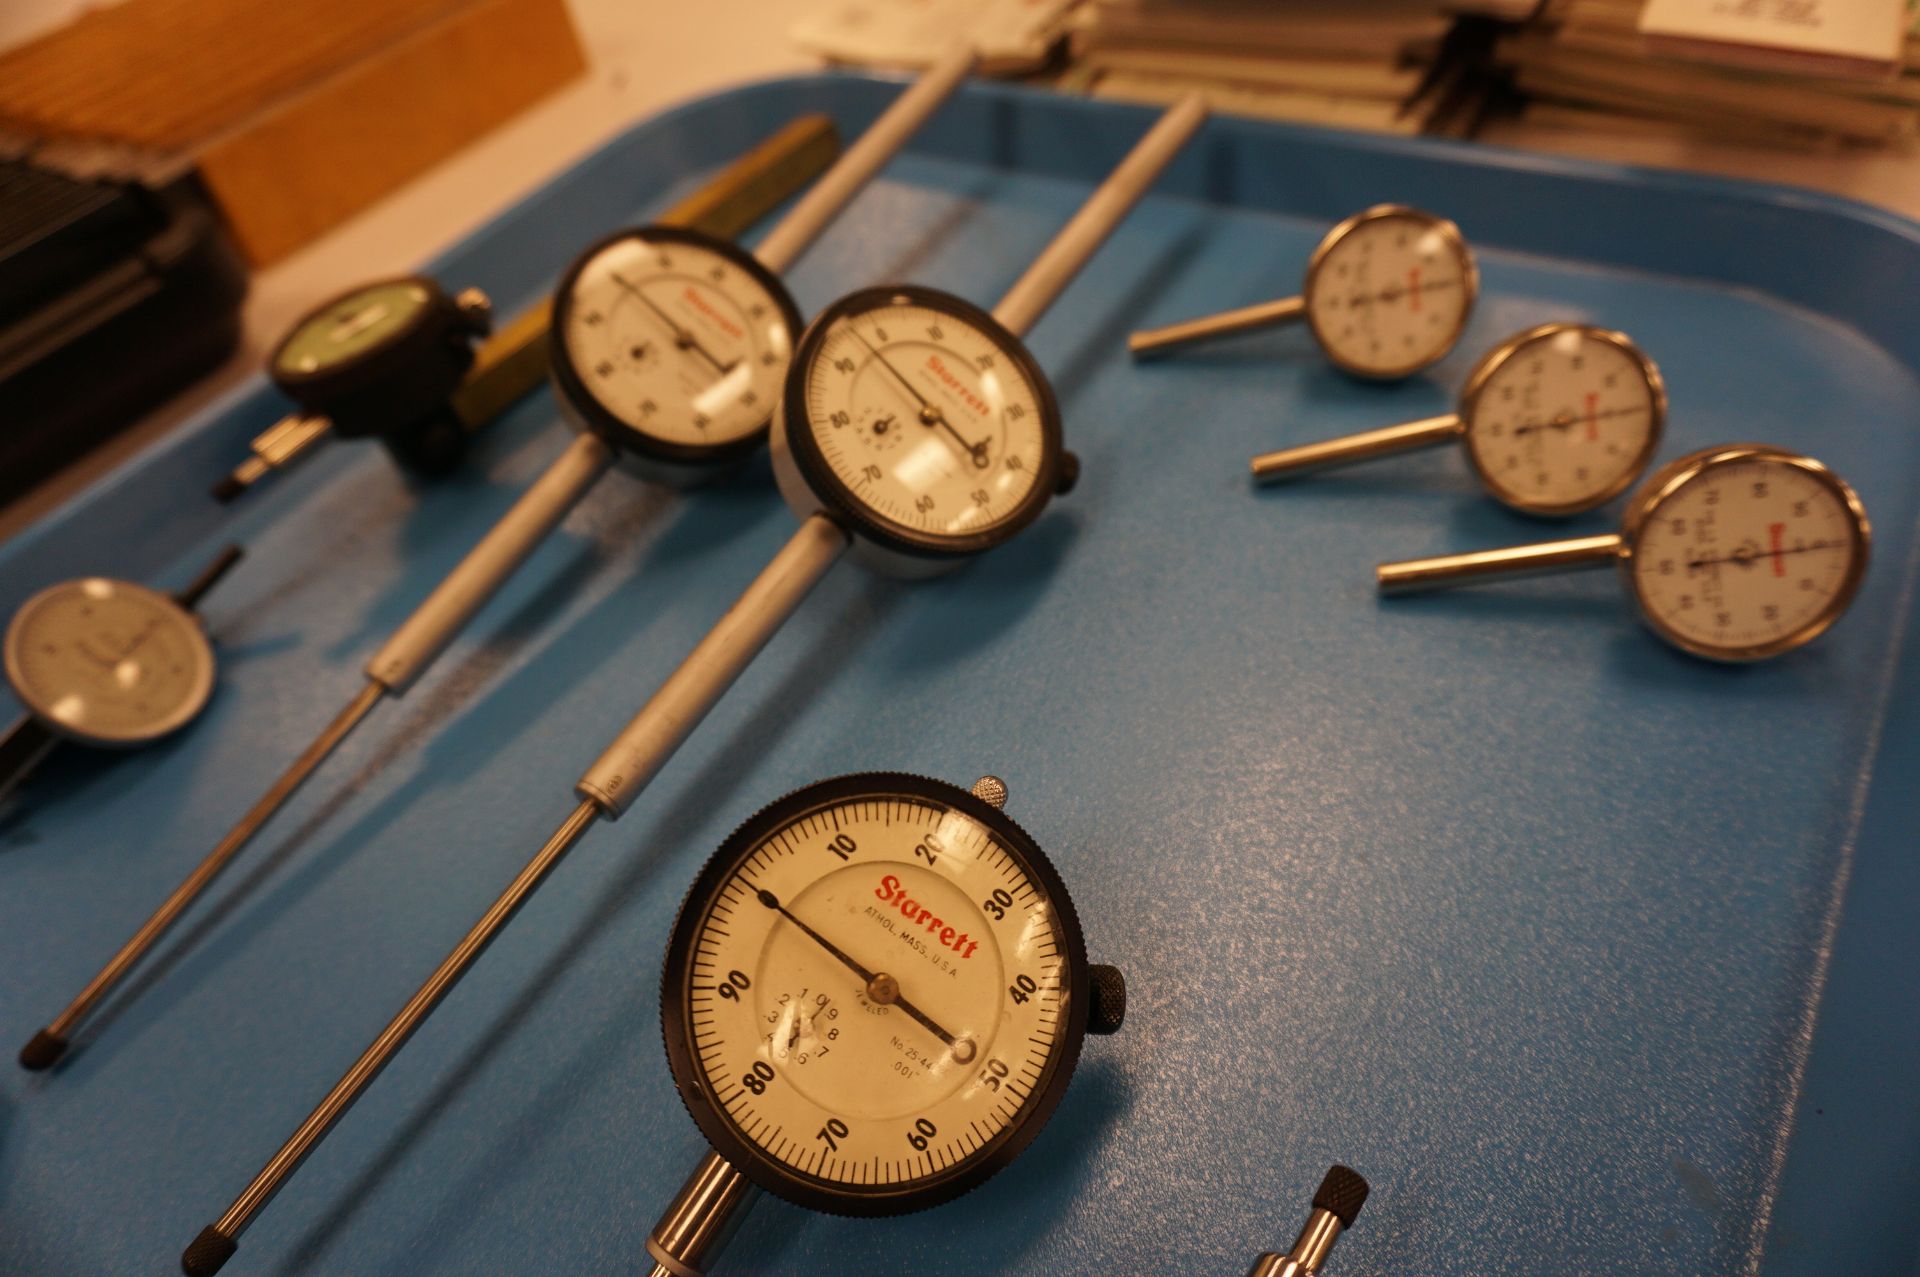 MISC. INDICATOR LOT WITH VERTICAL AND HORIZONTAL DIAL GAUGES, DROP GAUGES, Q-CEE'S STICKER SHEETS - Image 3 of 4